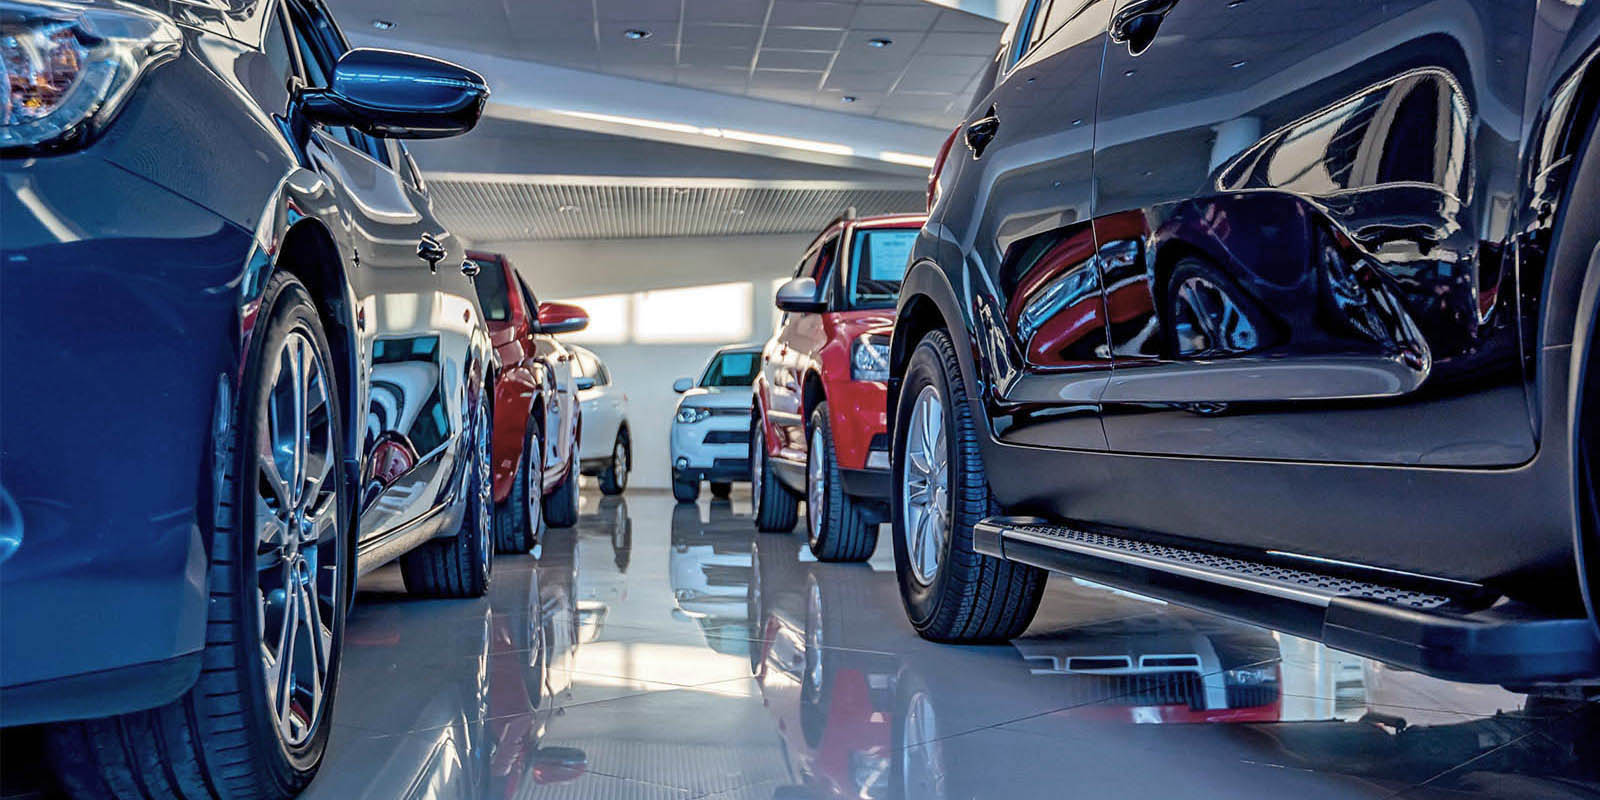 Ground view of cars in a dealership